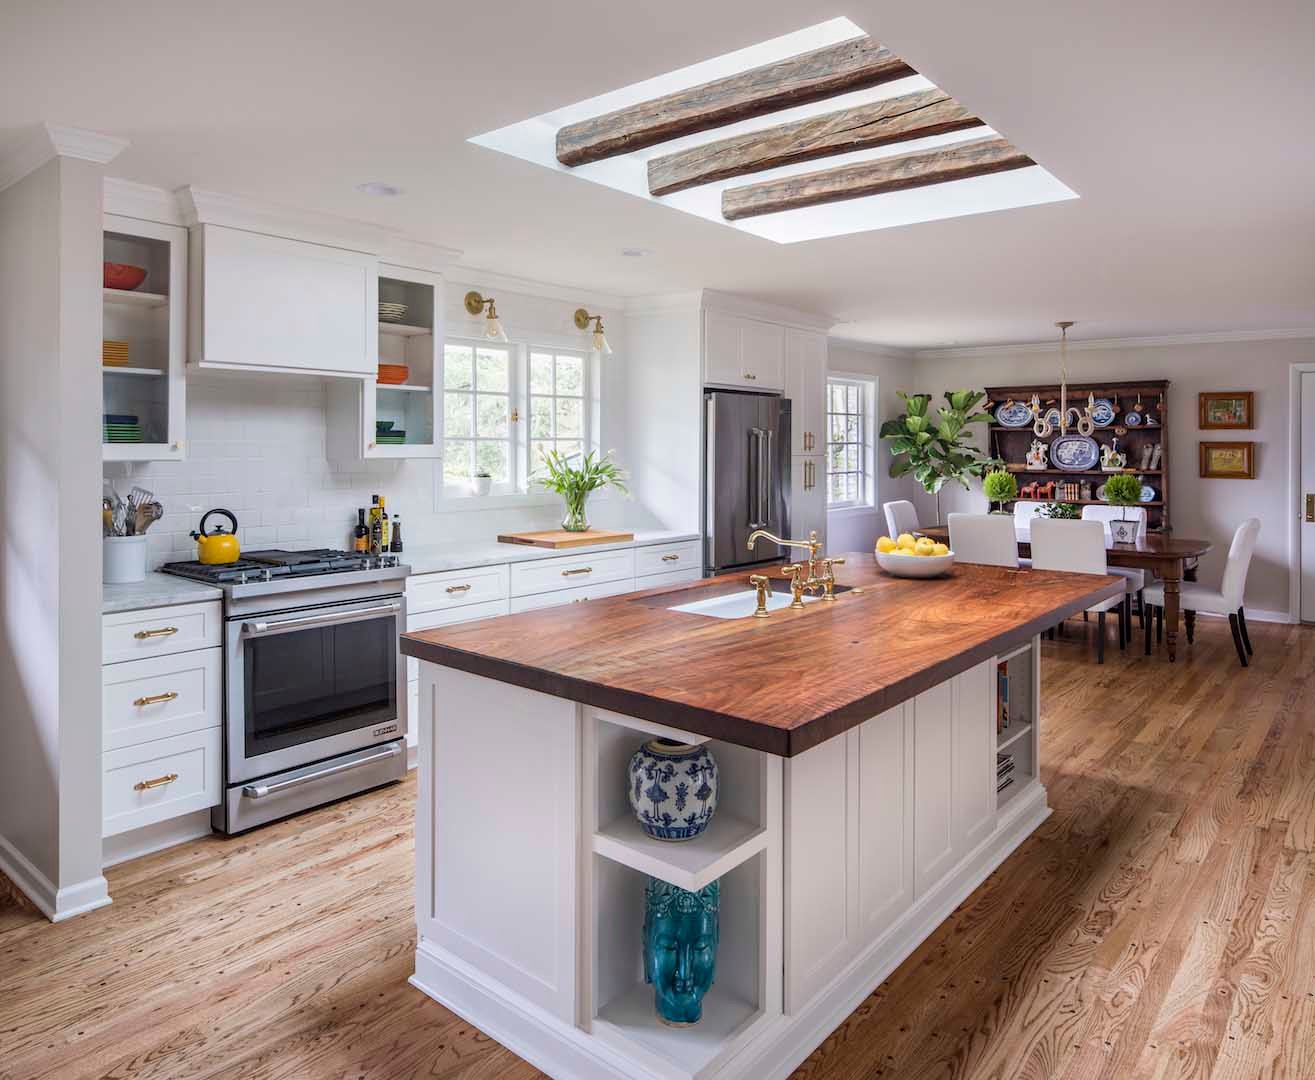 Large-Kitchen-Island-with-Walnut-Countertop-and-Open-Shelving-Natural-Oak-Hardwood-Floor-Oversized-Skylight-With-Rustic-Beams-1